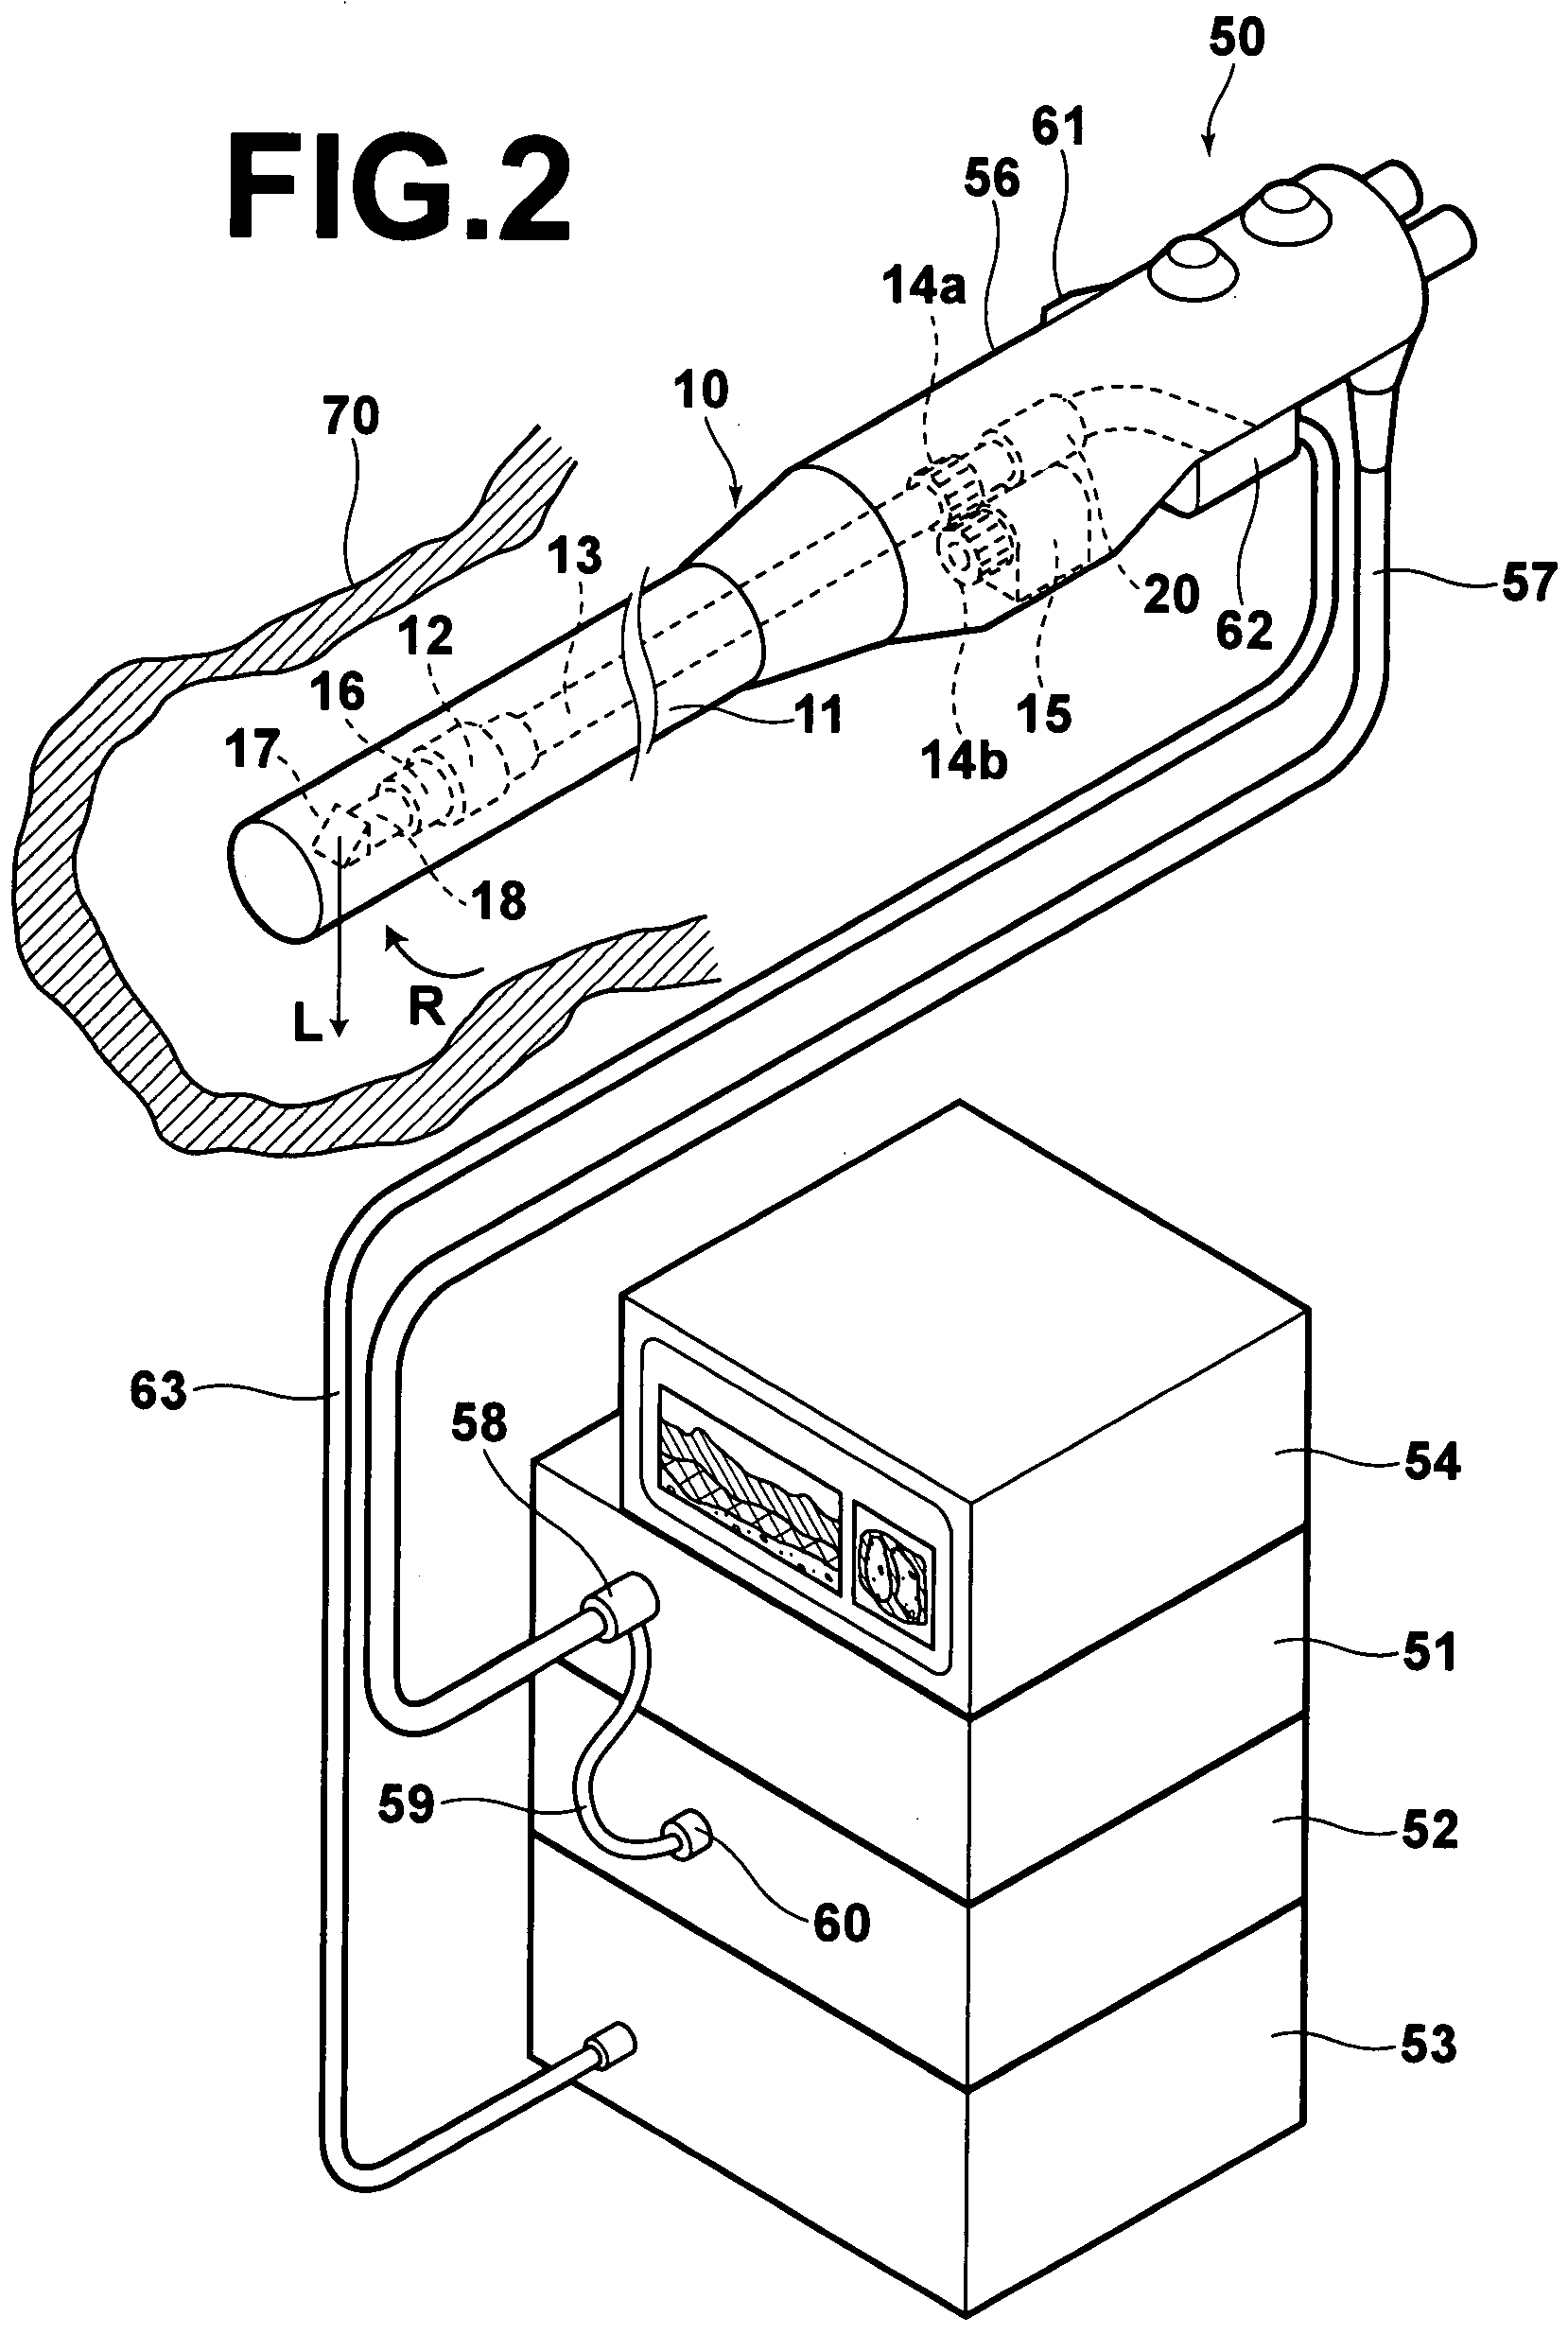 Probe and optical tomography system